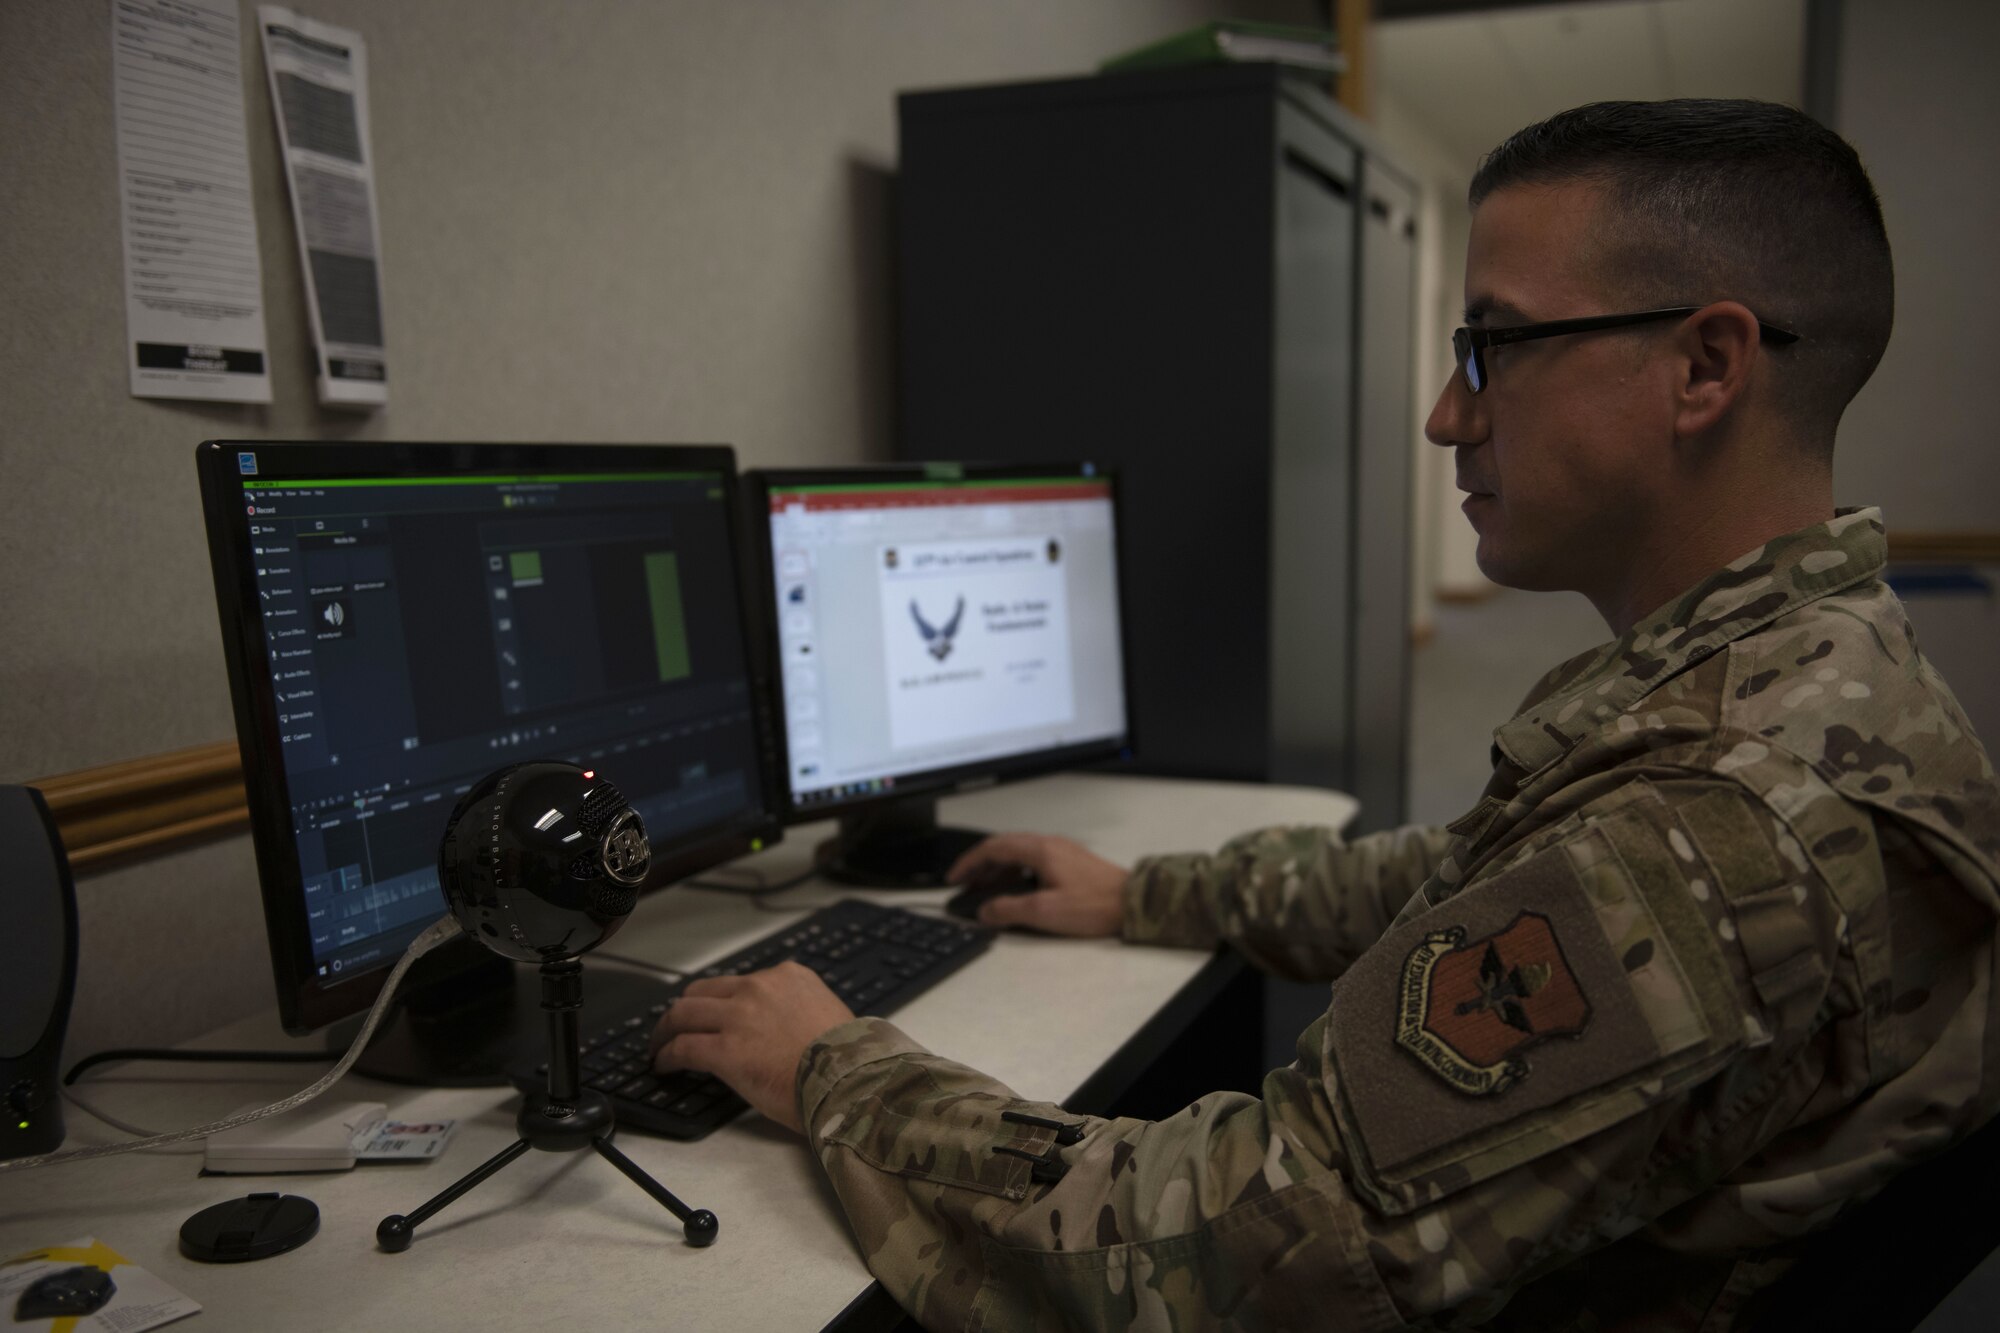 U.S. Air Force Maj. Anthony Keith, Undergraduate ABM Course instructor, edits a lesson to upload online for students at Tyndall Air Force Base, Florida Aug. 6, 2019. The instructors spent hours recording and editing each lesson for students to have a unique learning format for the course. (U.S. Air Force photo by Airman 1st Class Heather Leveille)